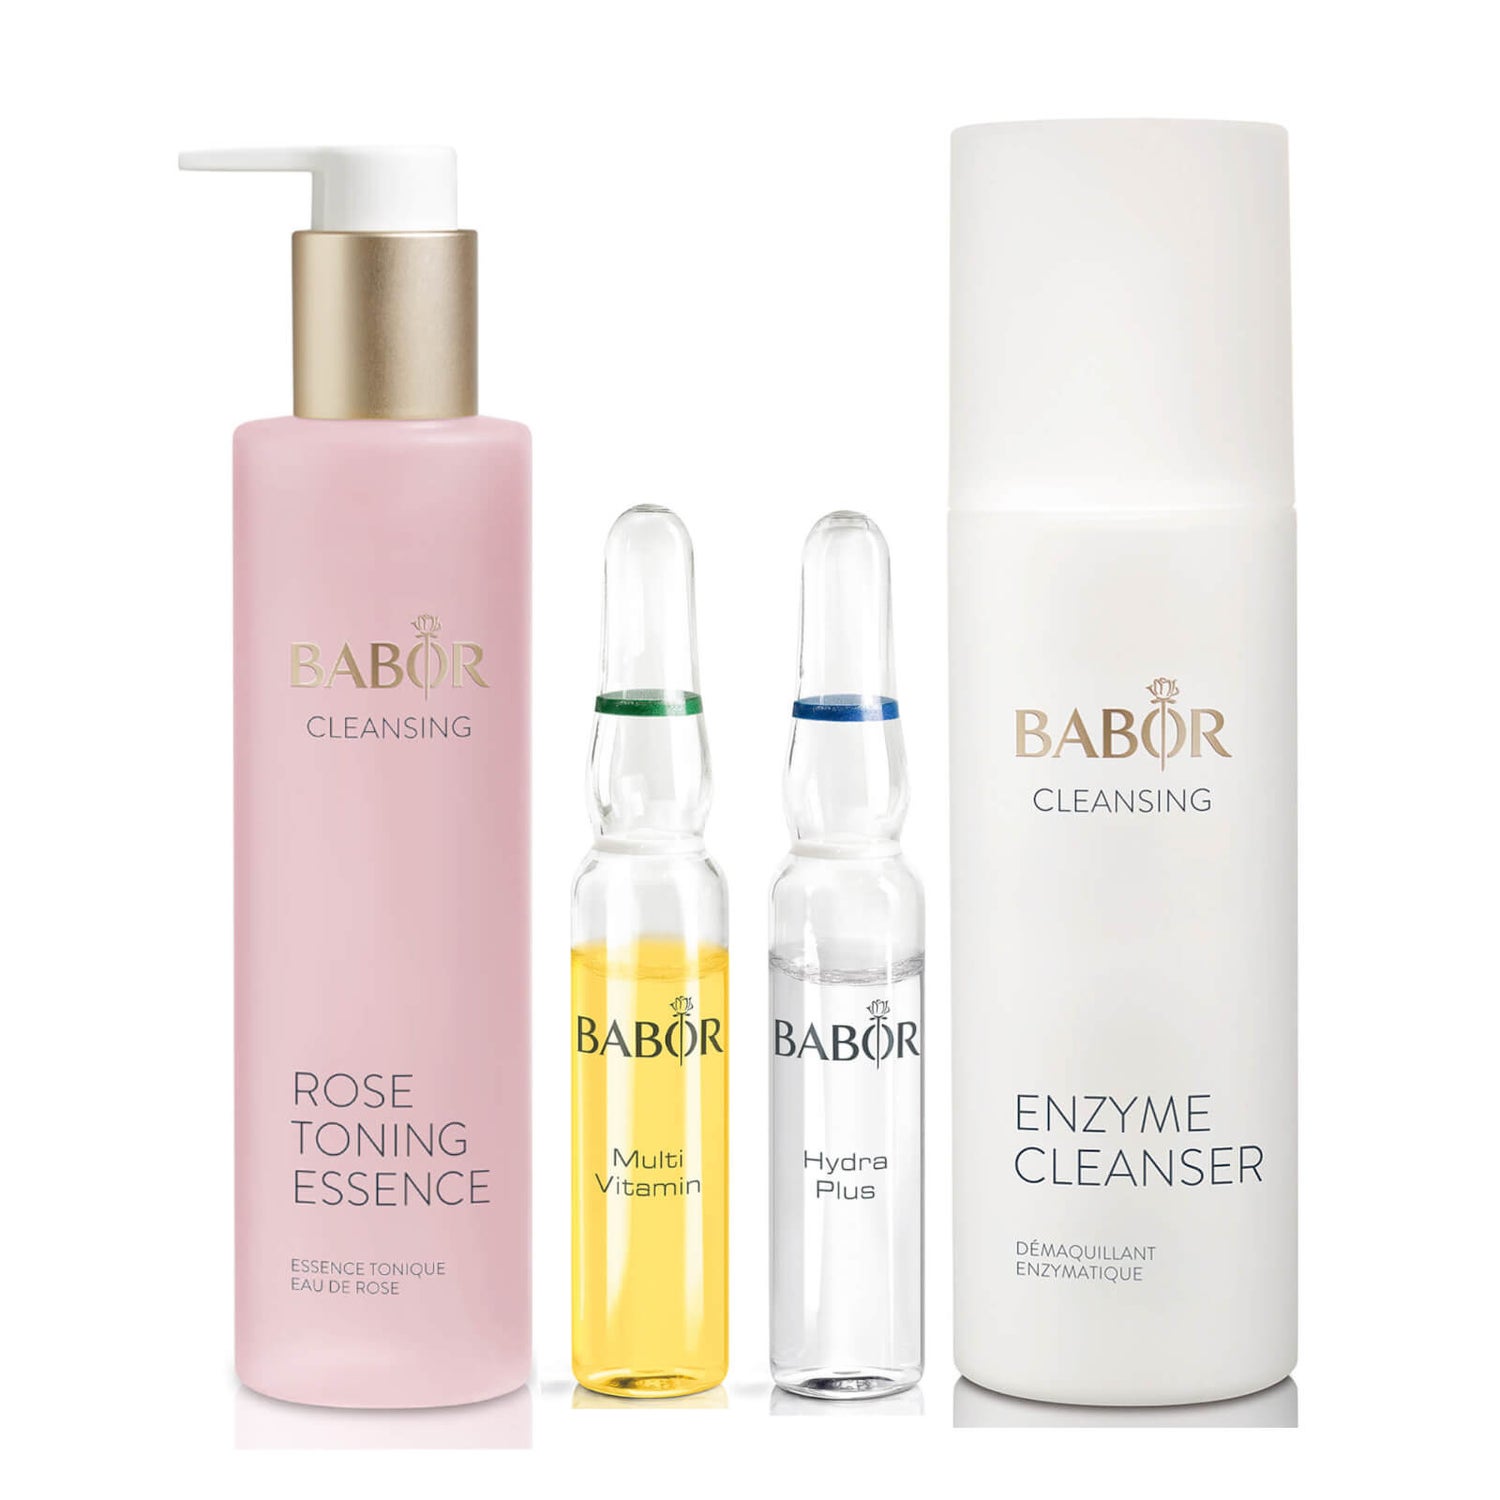 BABOR The Best of BABOR Collection (Worth $131.00)